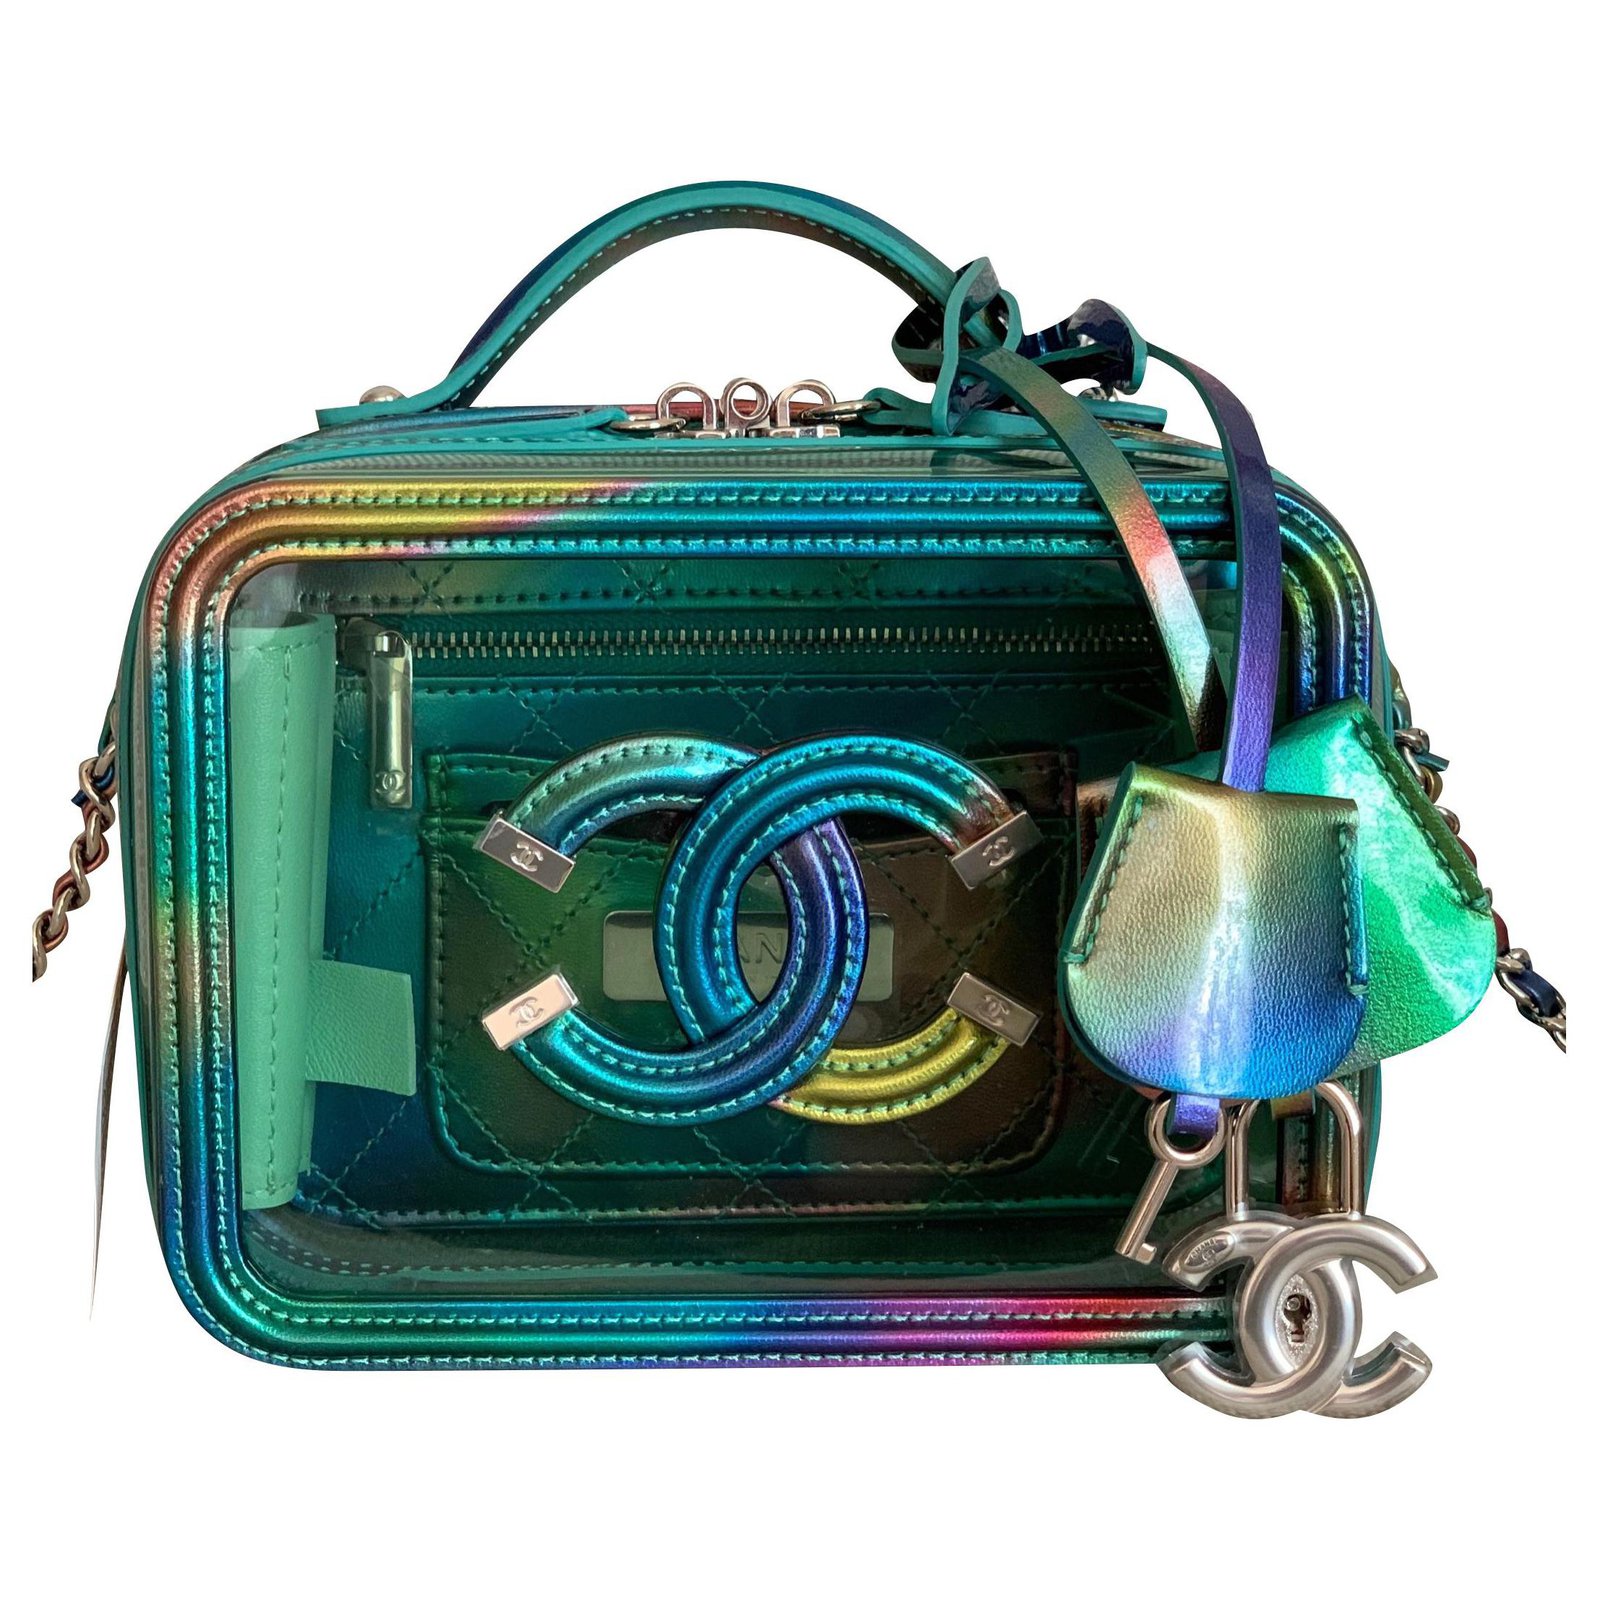 Handbags Chanel Small Green PVC Vanity Case with Rainbow Patent Leather